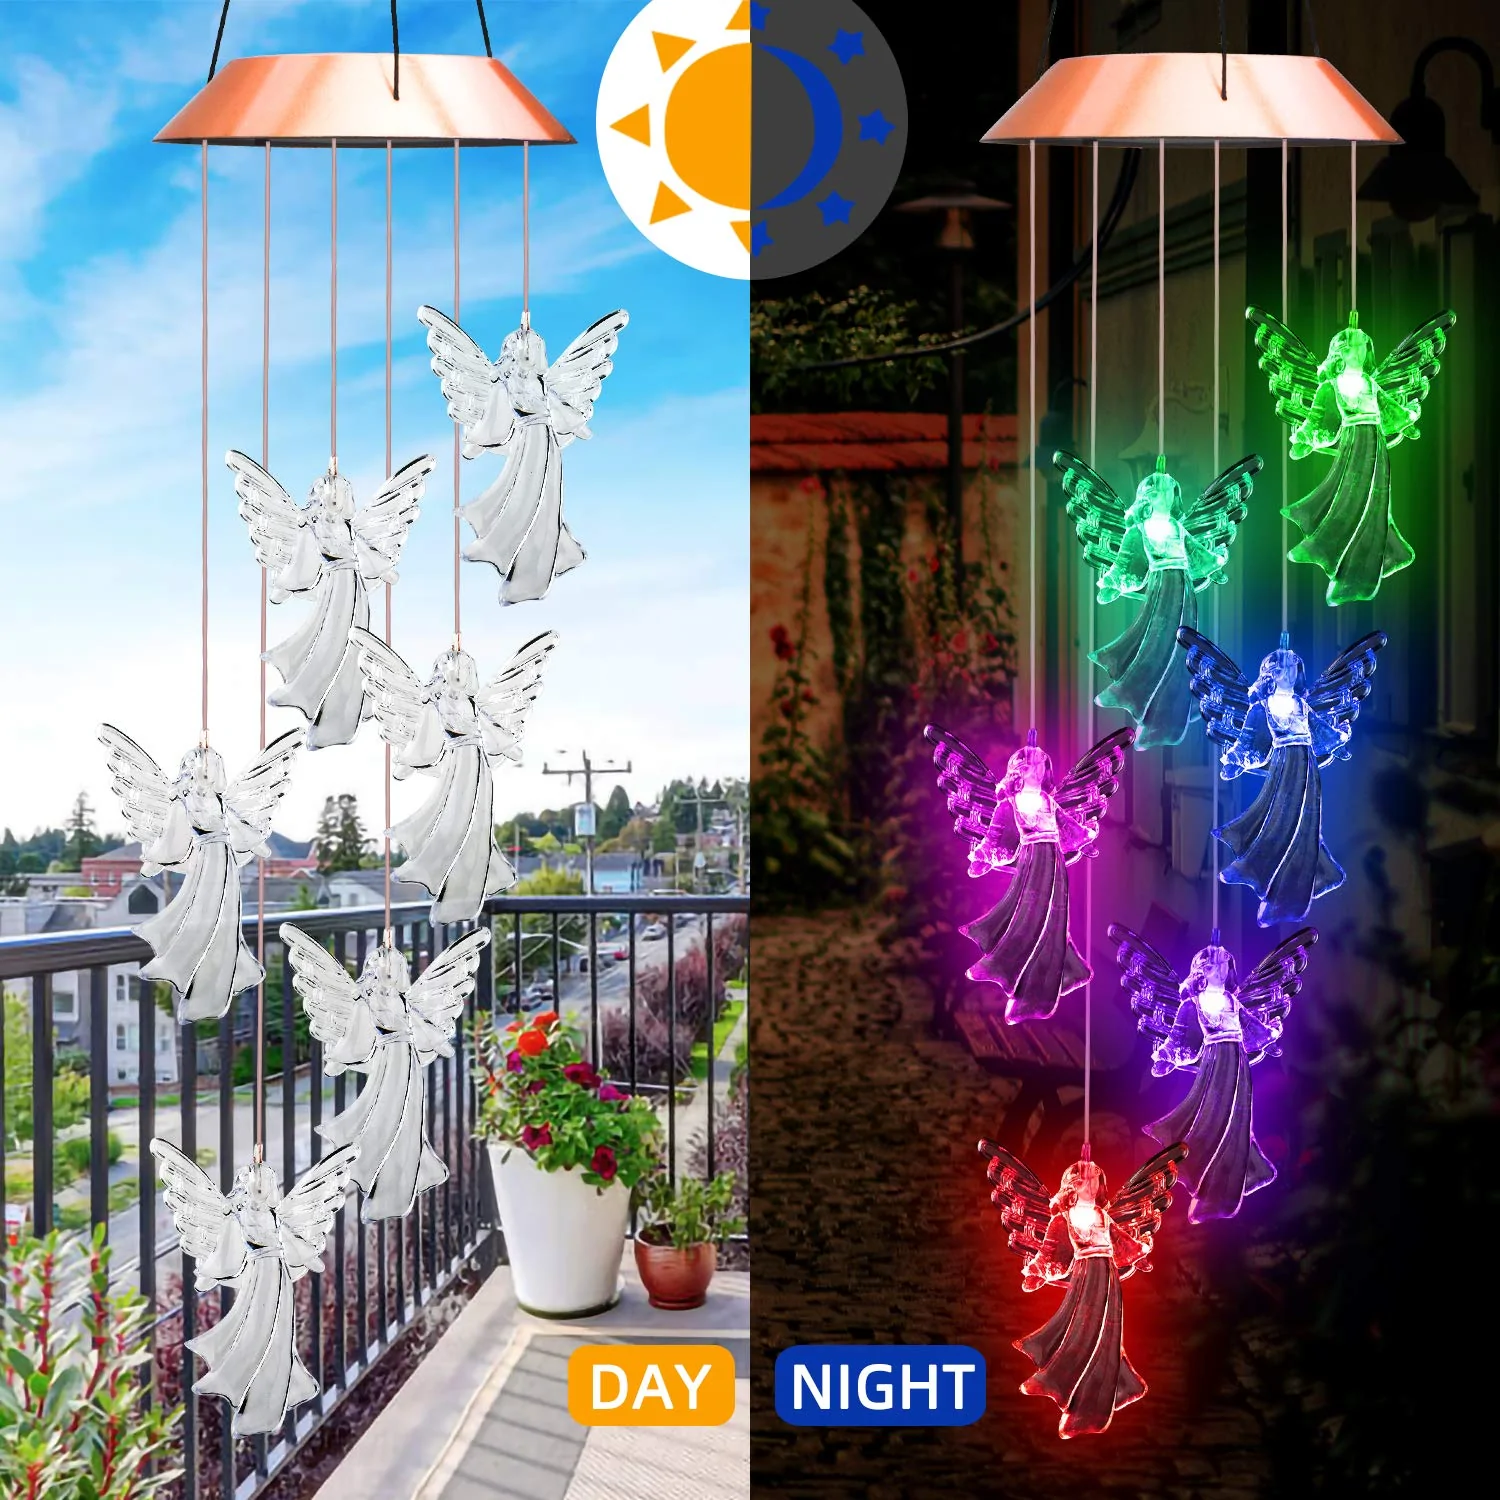 🔥Hot Sale - SAVE 50% OFF - Solar Guardian Angel Wind Chime Light